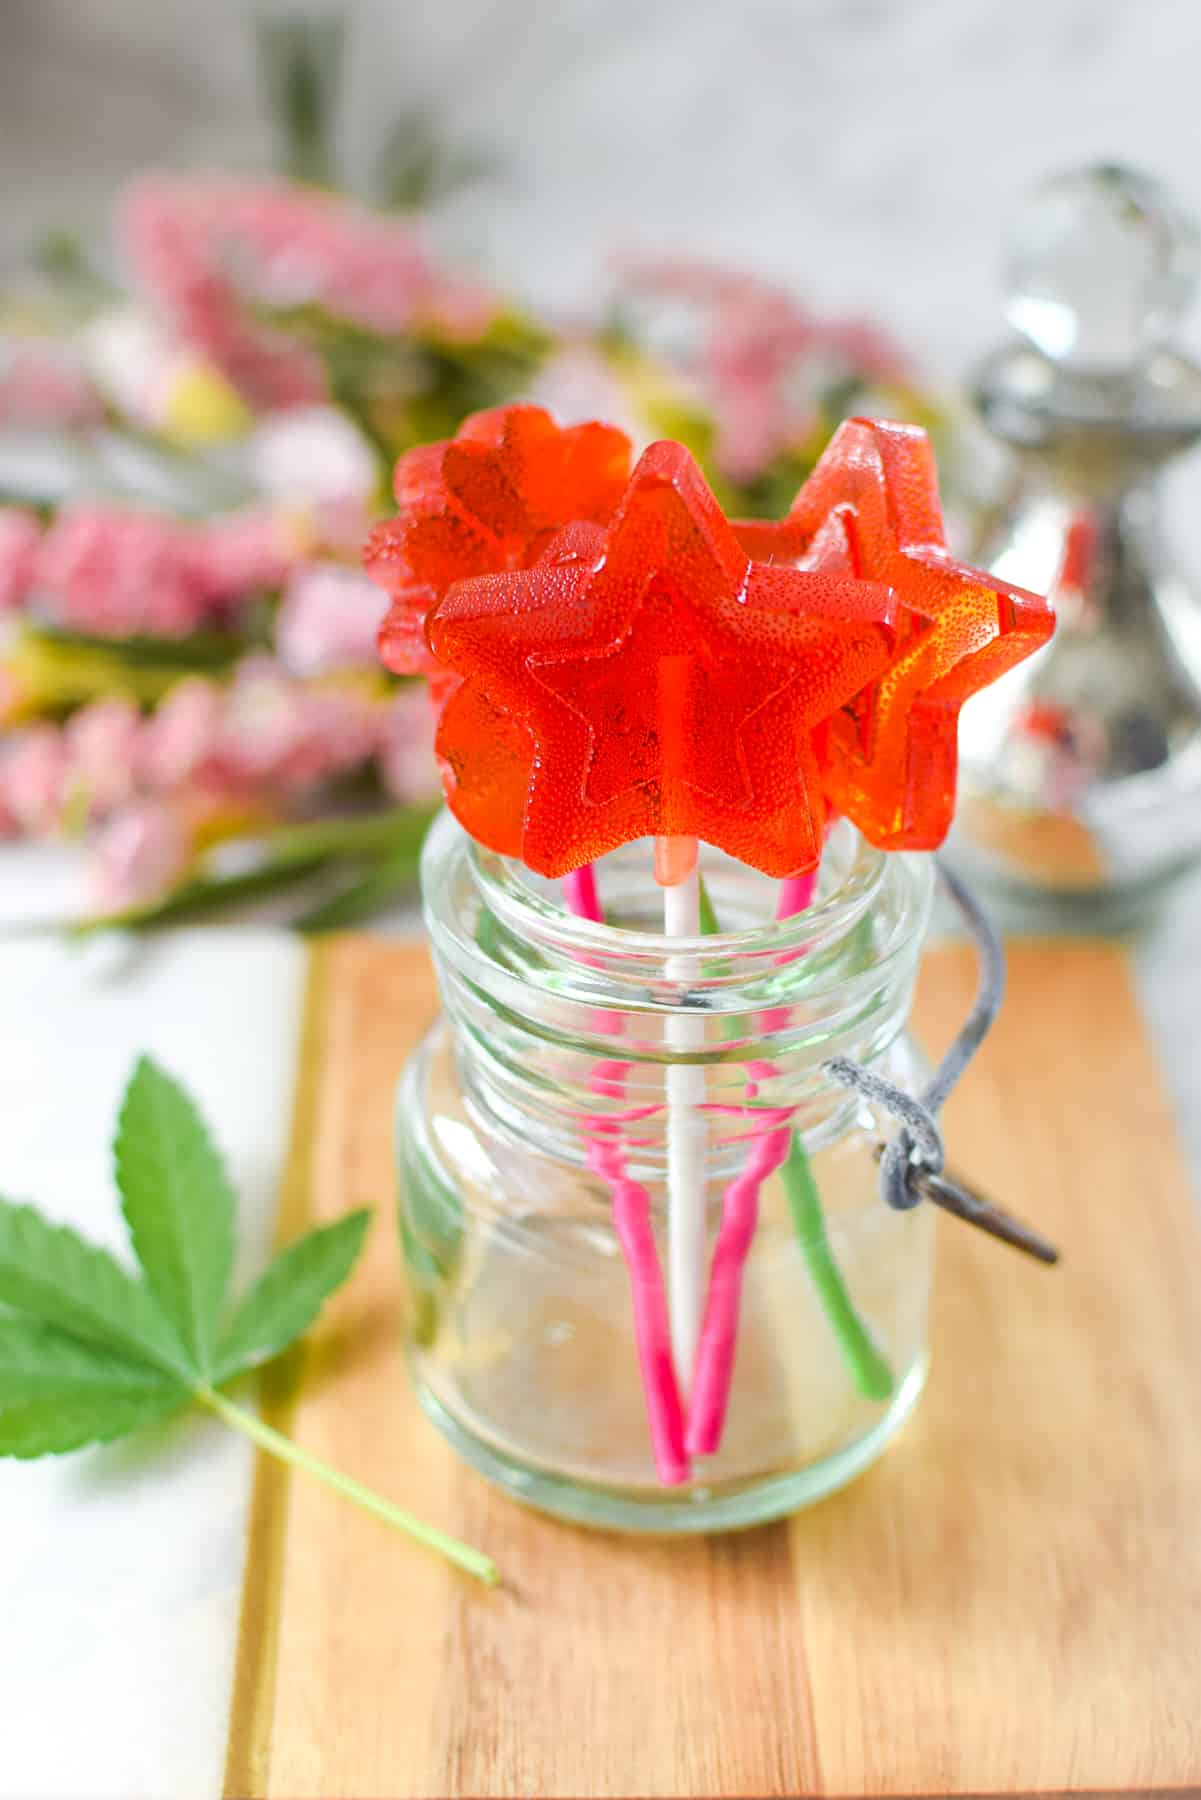 A wooden cutting board with a small mason jar full of red cannabis lollipops